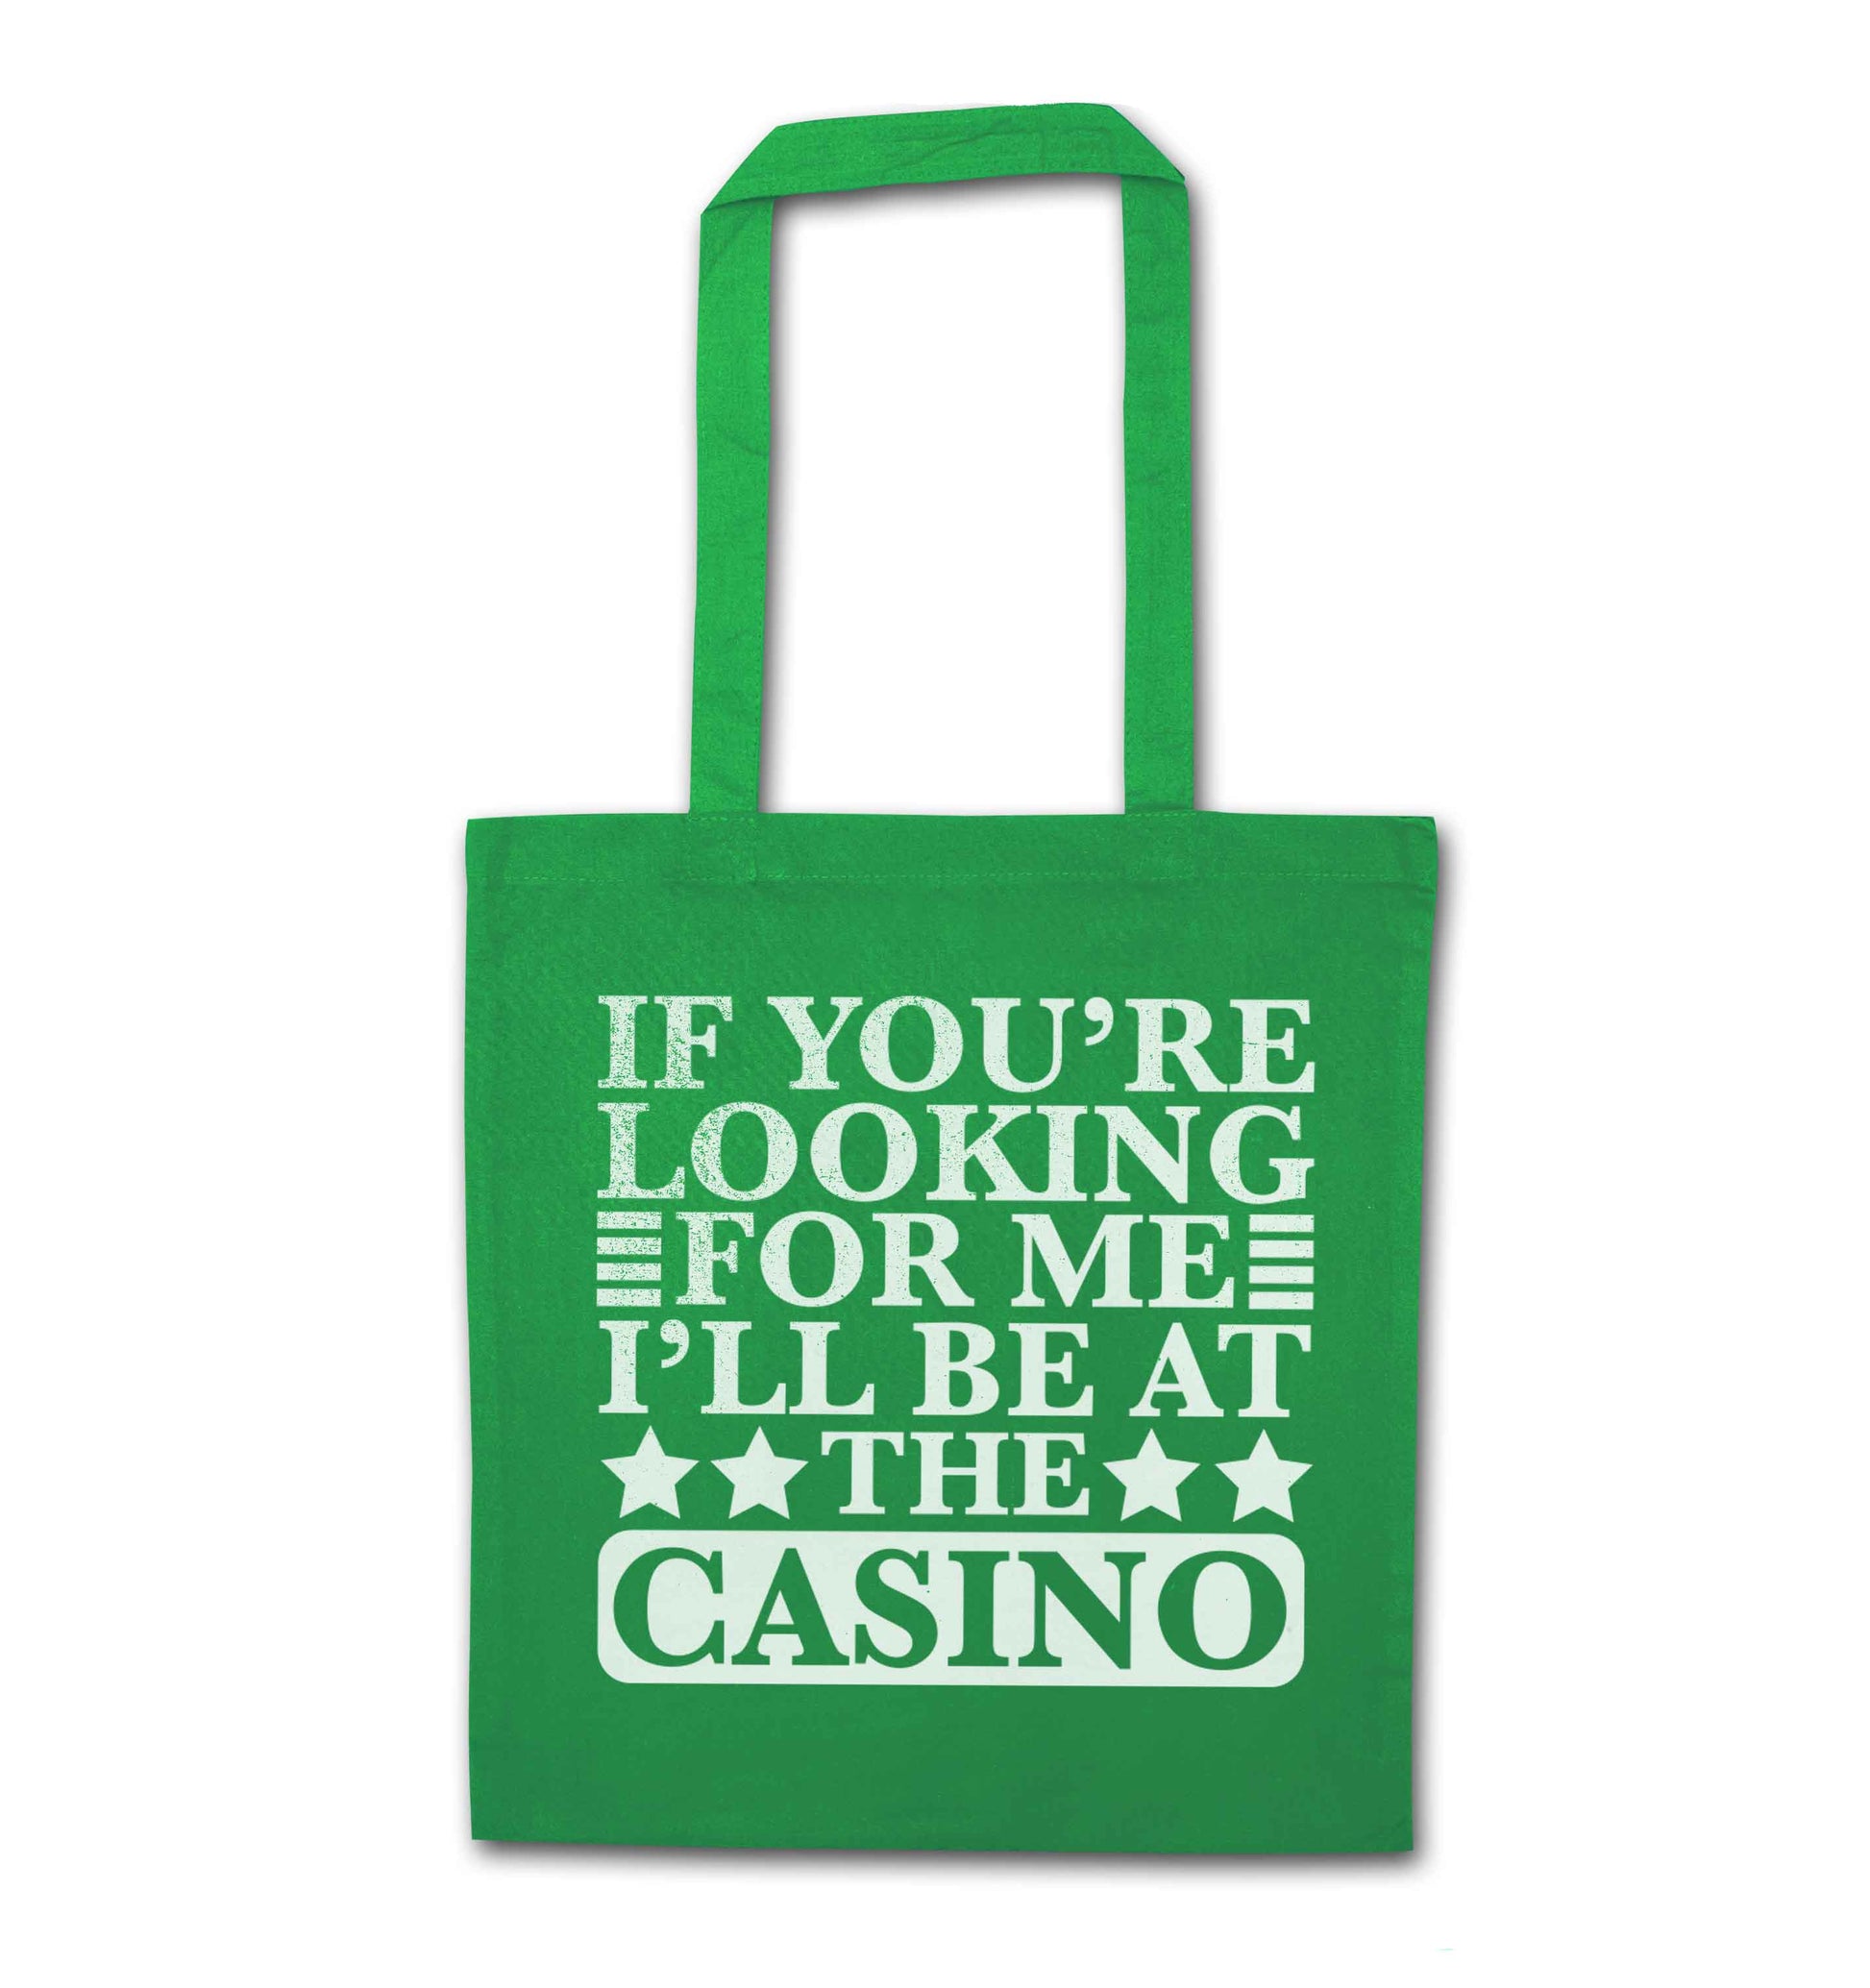 If you're looking for me I'll be at the casino green tote bag